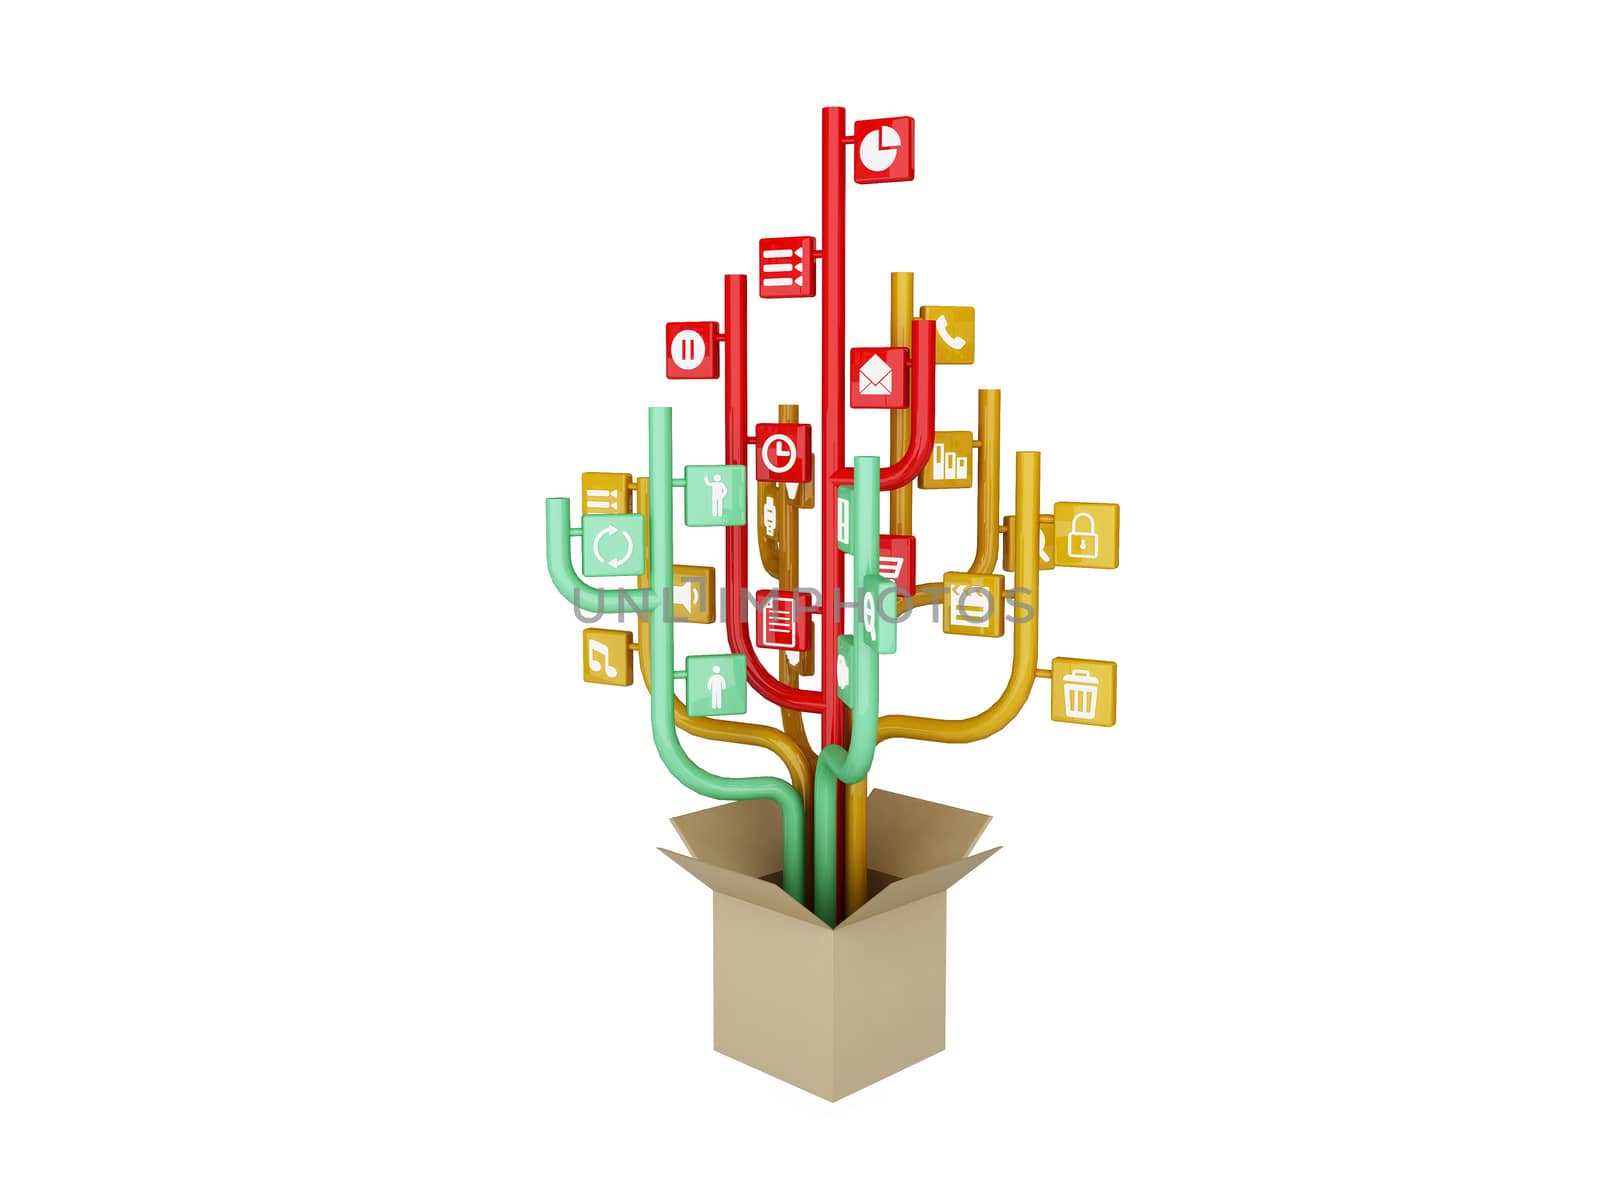 the tree consisting of the icons on the topic of social media. Out of the Box